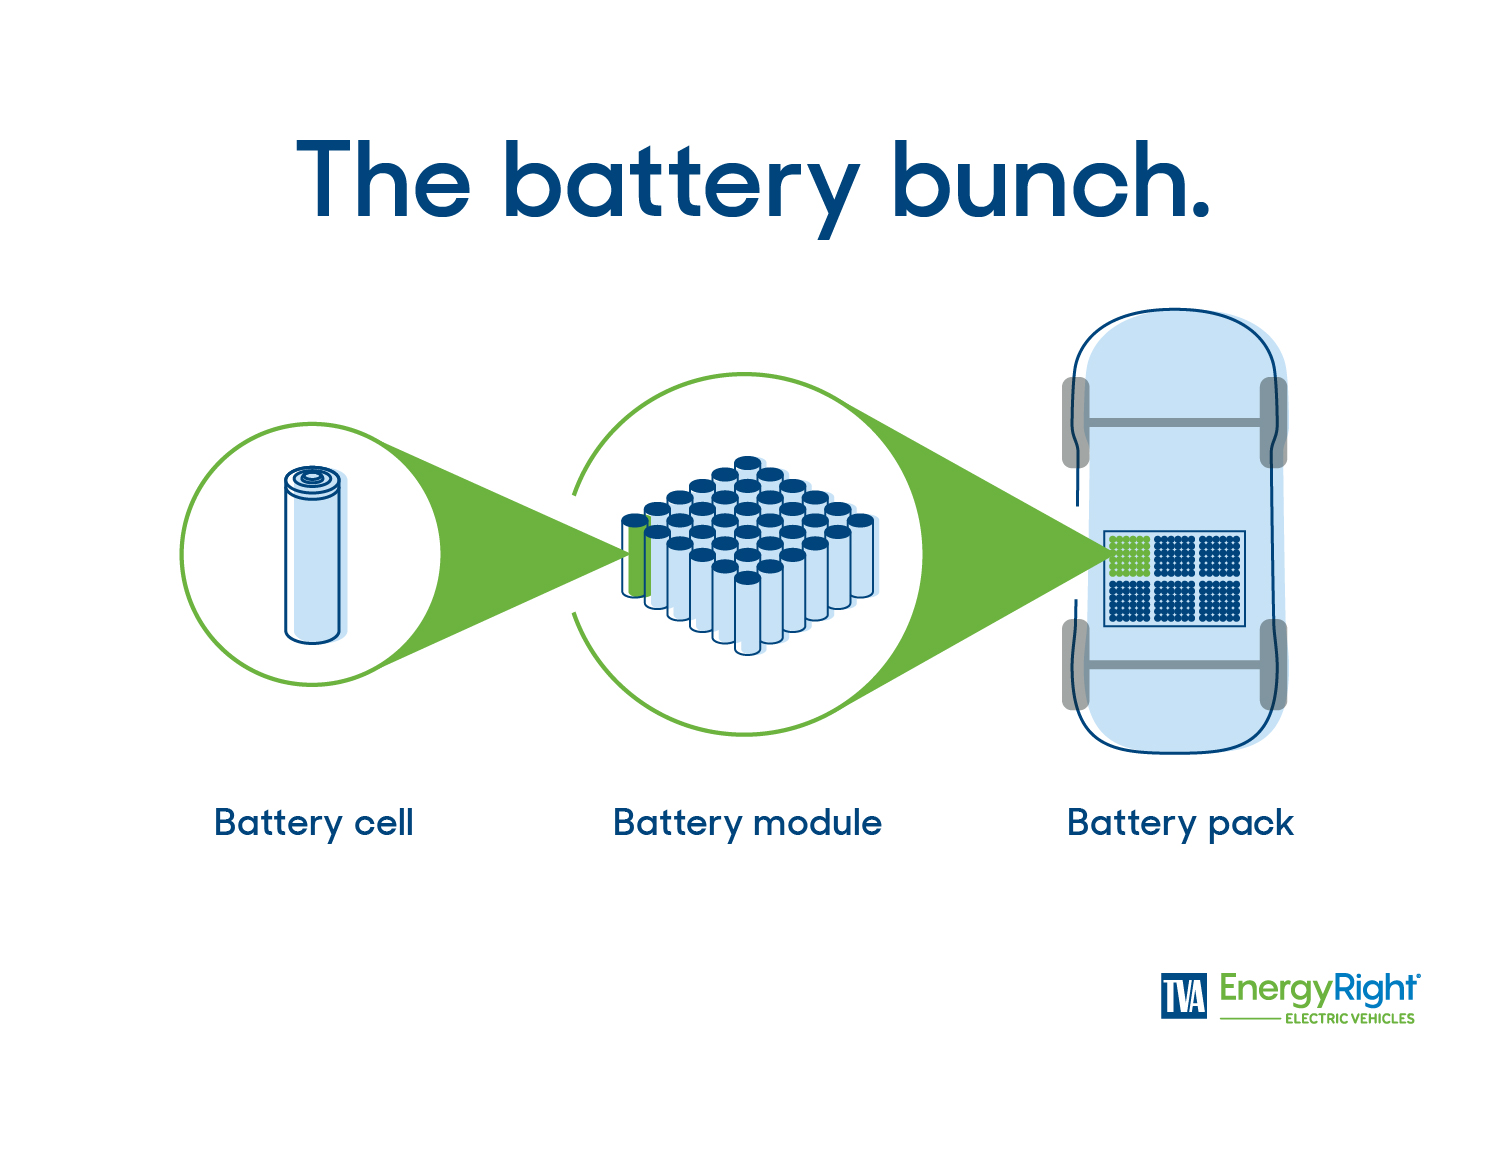 Graphic illustrating battery cell, battery module, and battery pack.